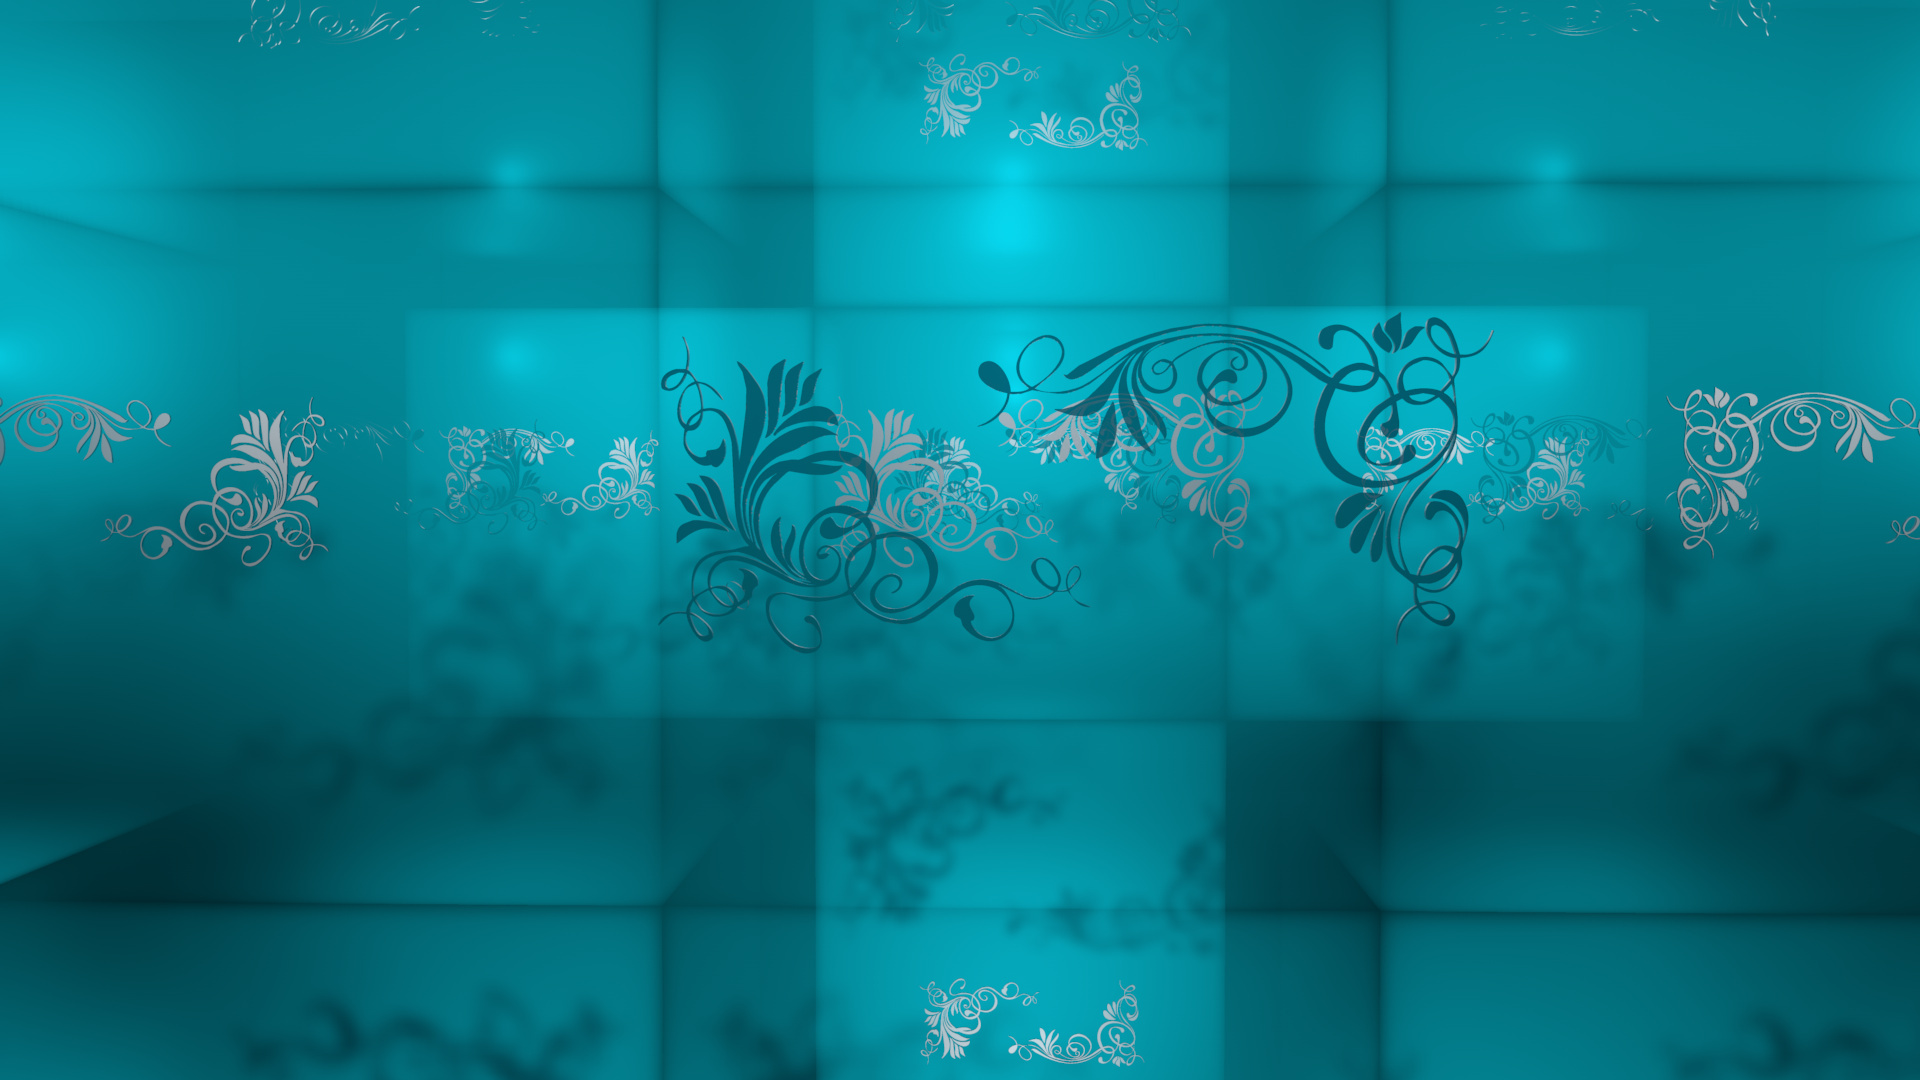 Flower Pattern Turquoise 1920x1080